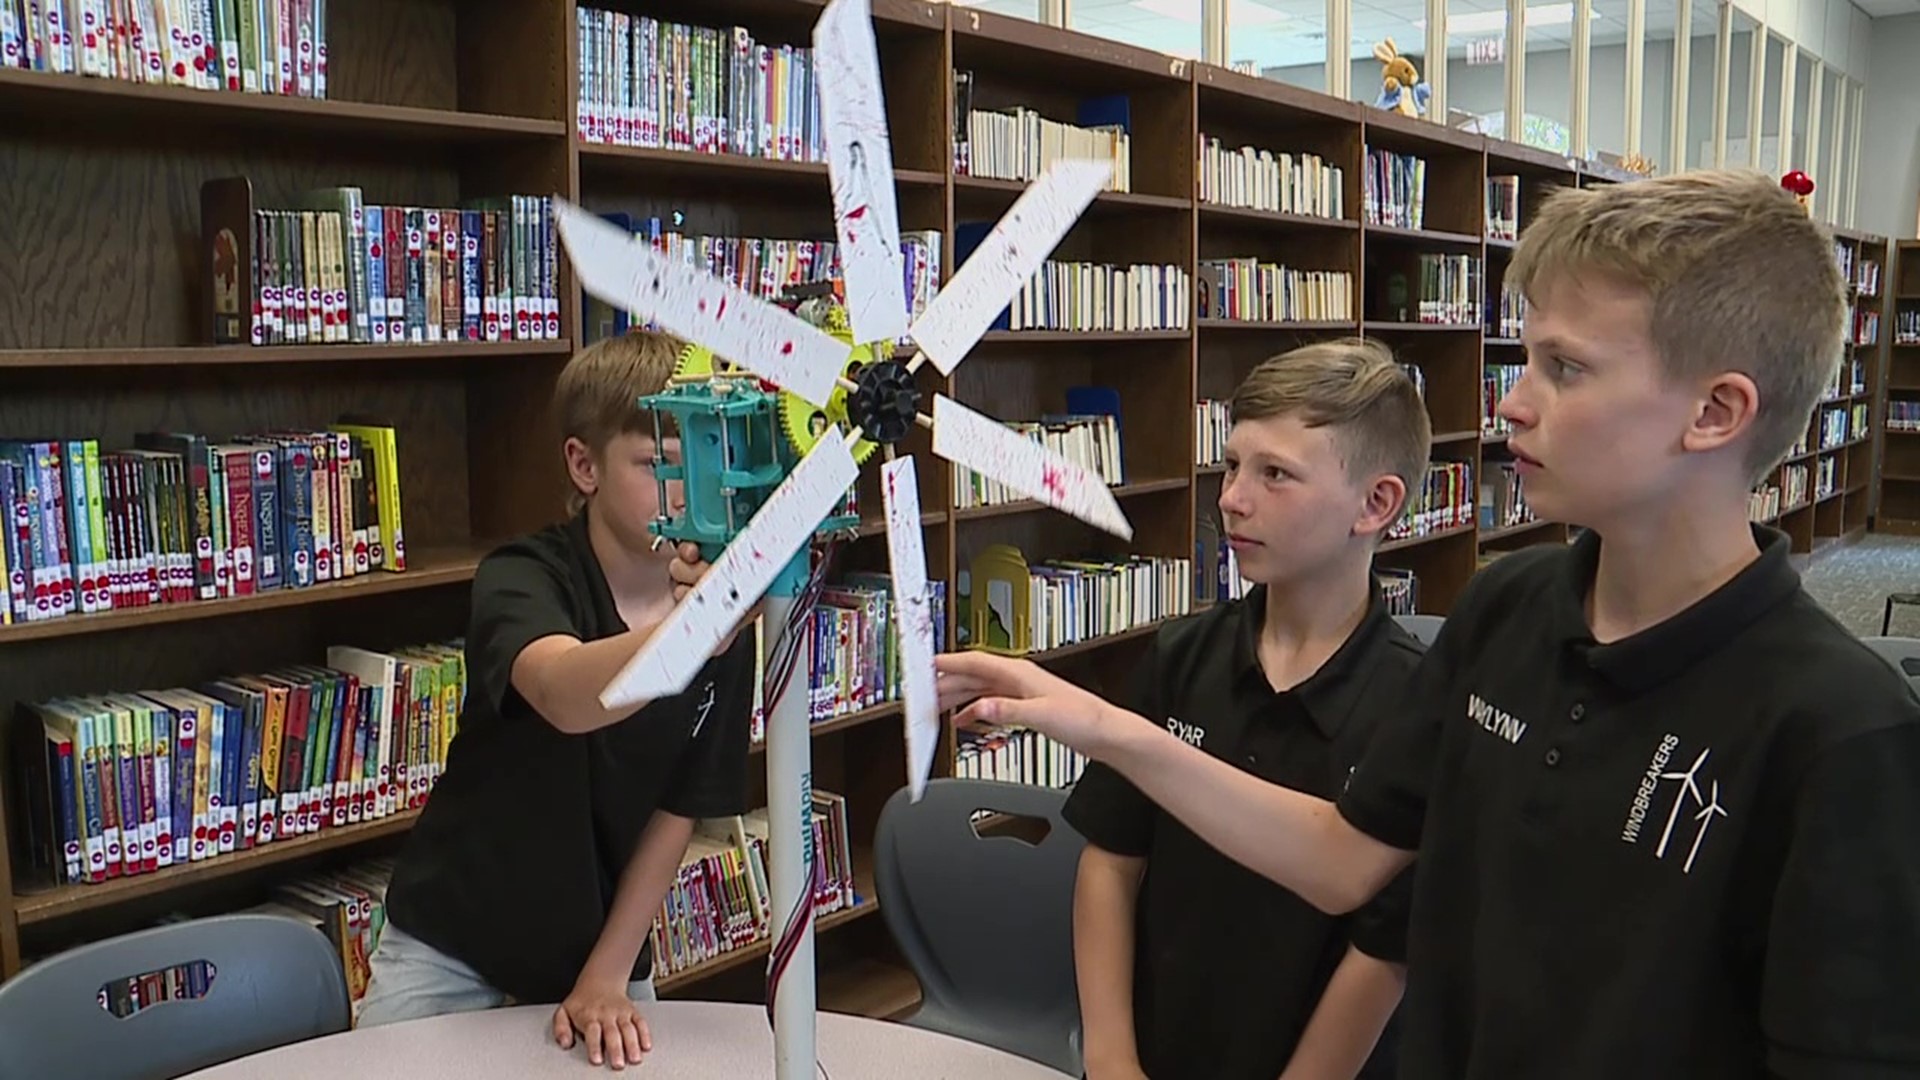 The students competed in a renewable energy challenge against other schools in Colorado.